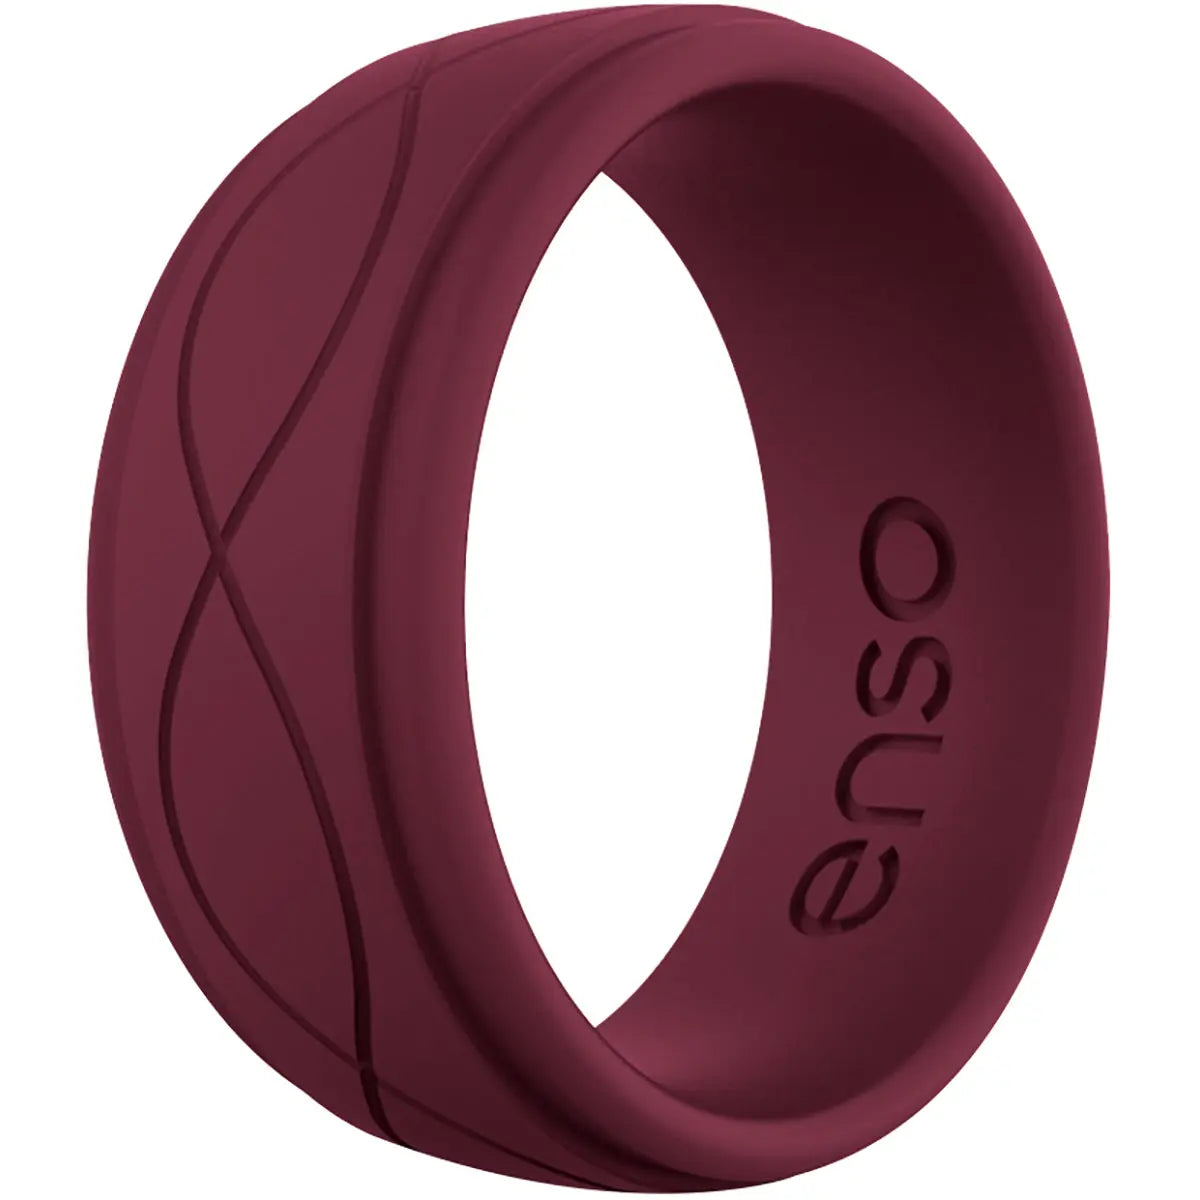 Enso Rings Men's Infinity Series Silicone Ring Enso Rings